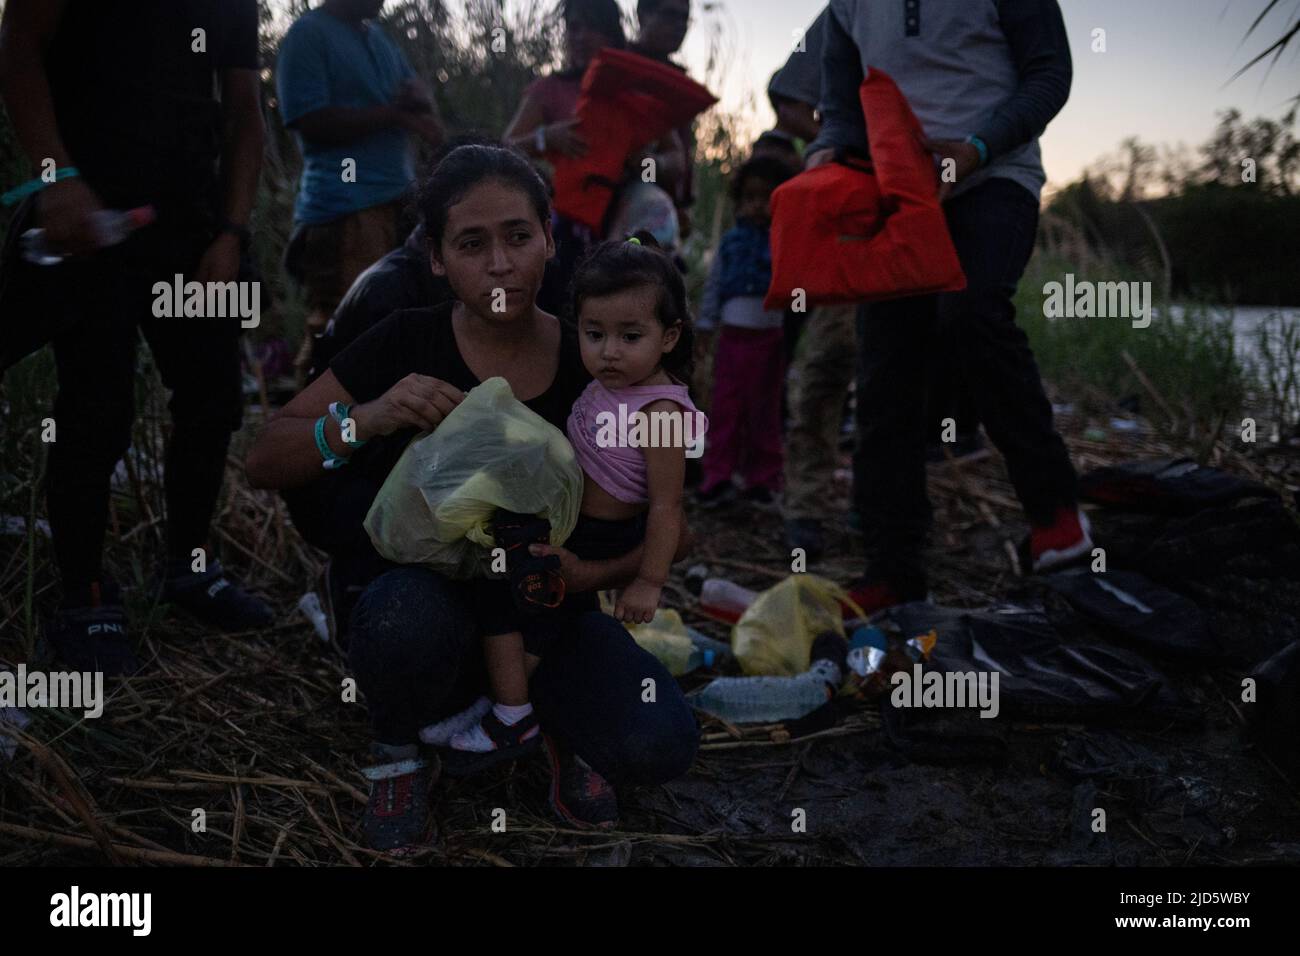 Maria, an asylum-seeking migrant from Honduras, holds her one-year-old daughter Mariette as they take shelter on a sandbar before being smuggled across Rio Bravo del Norte, also known as the Rio Grande river, into Roma, Texas, U.S. from Ciudad Miguel Aleman, Mexico June 17, 2022. Picture taken June 17, 2022. REUTERS/Adrees Latif Stock Photo